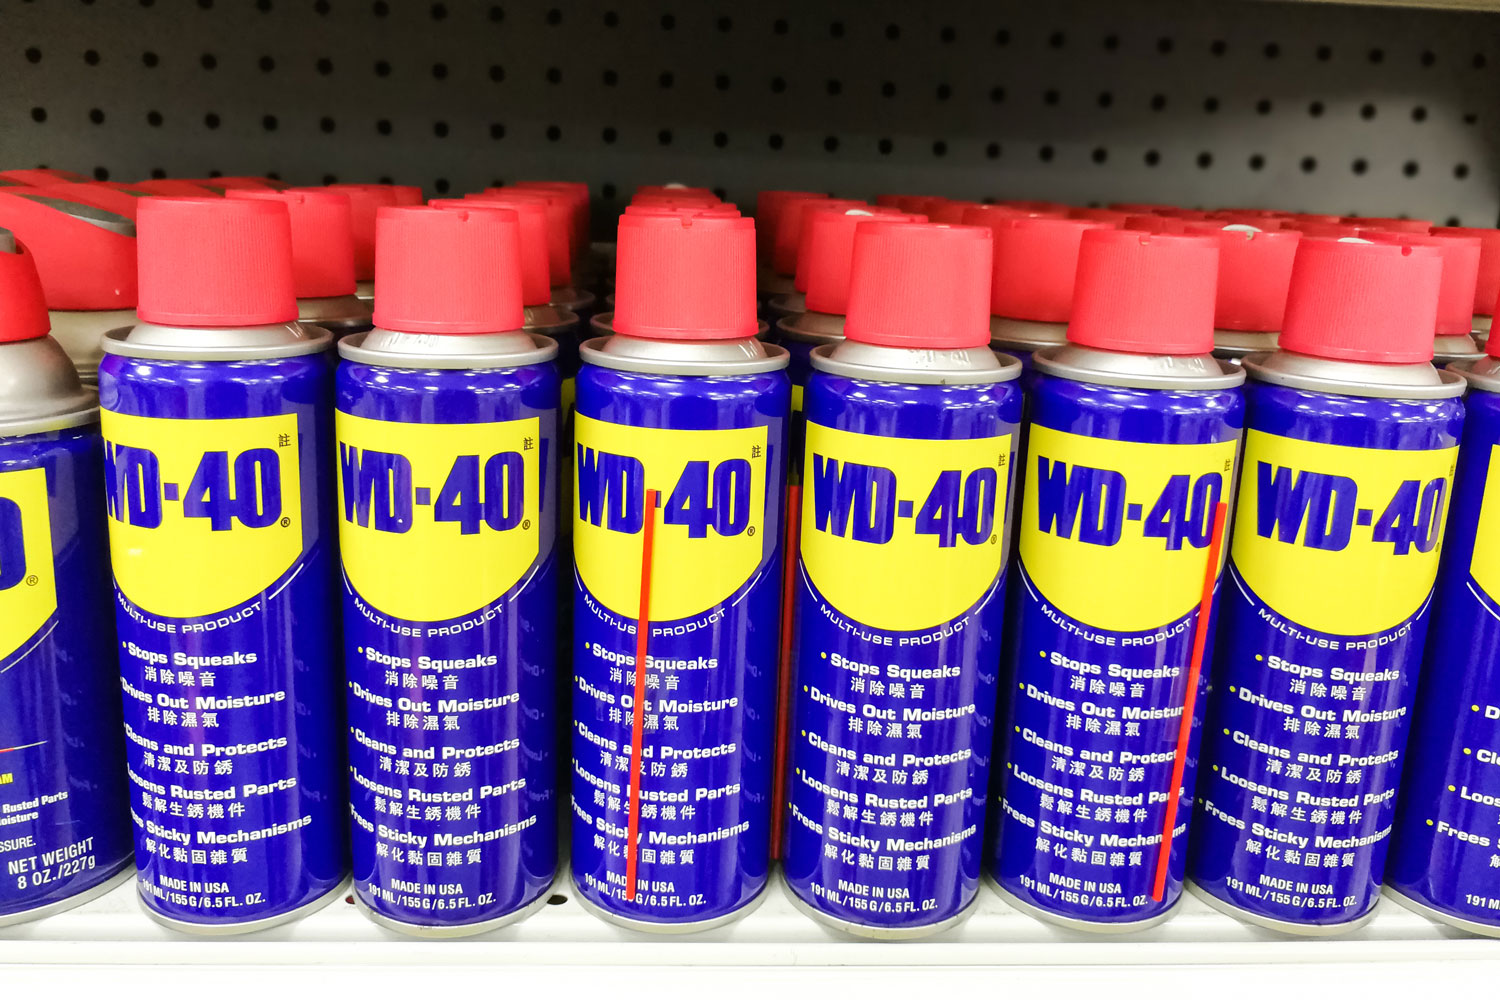 A store shelf filled with WD-40 products